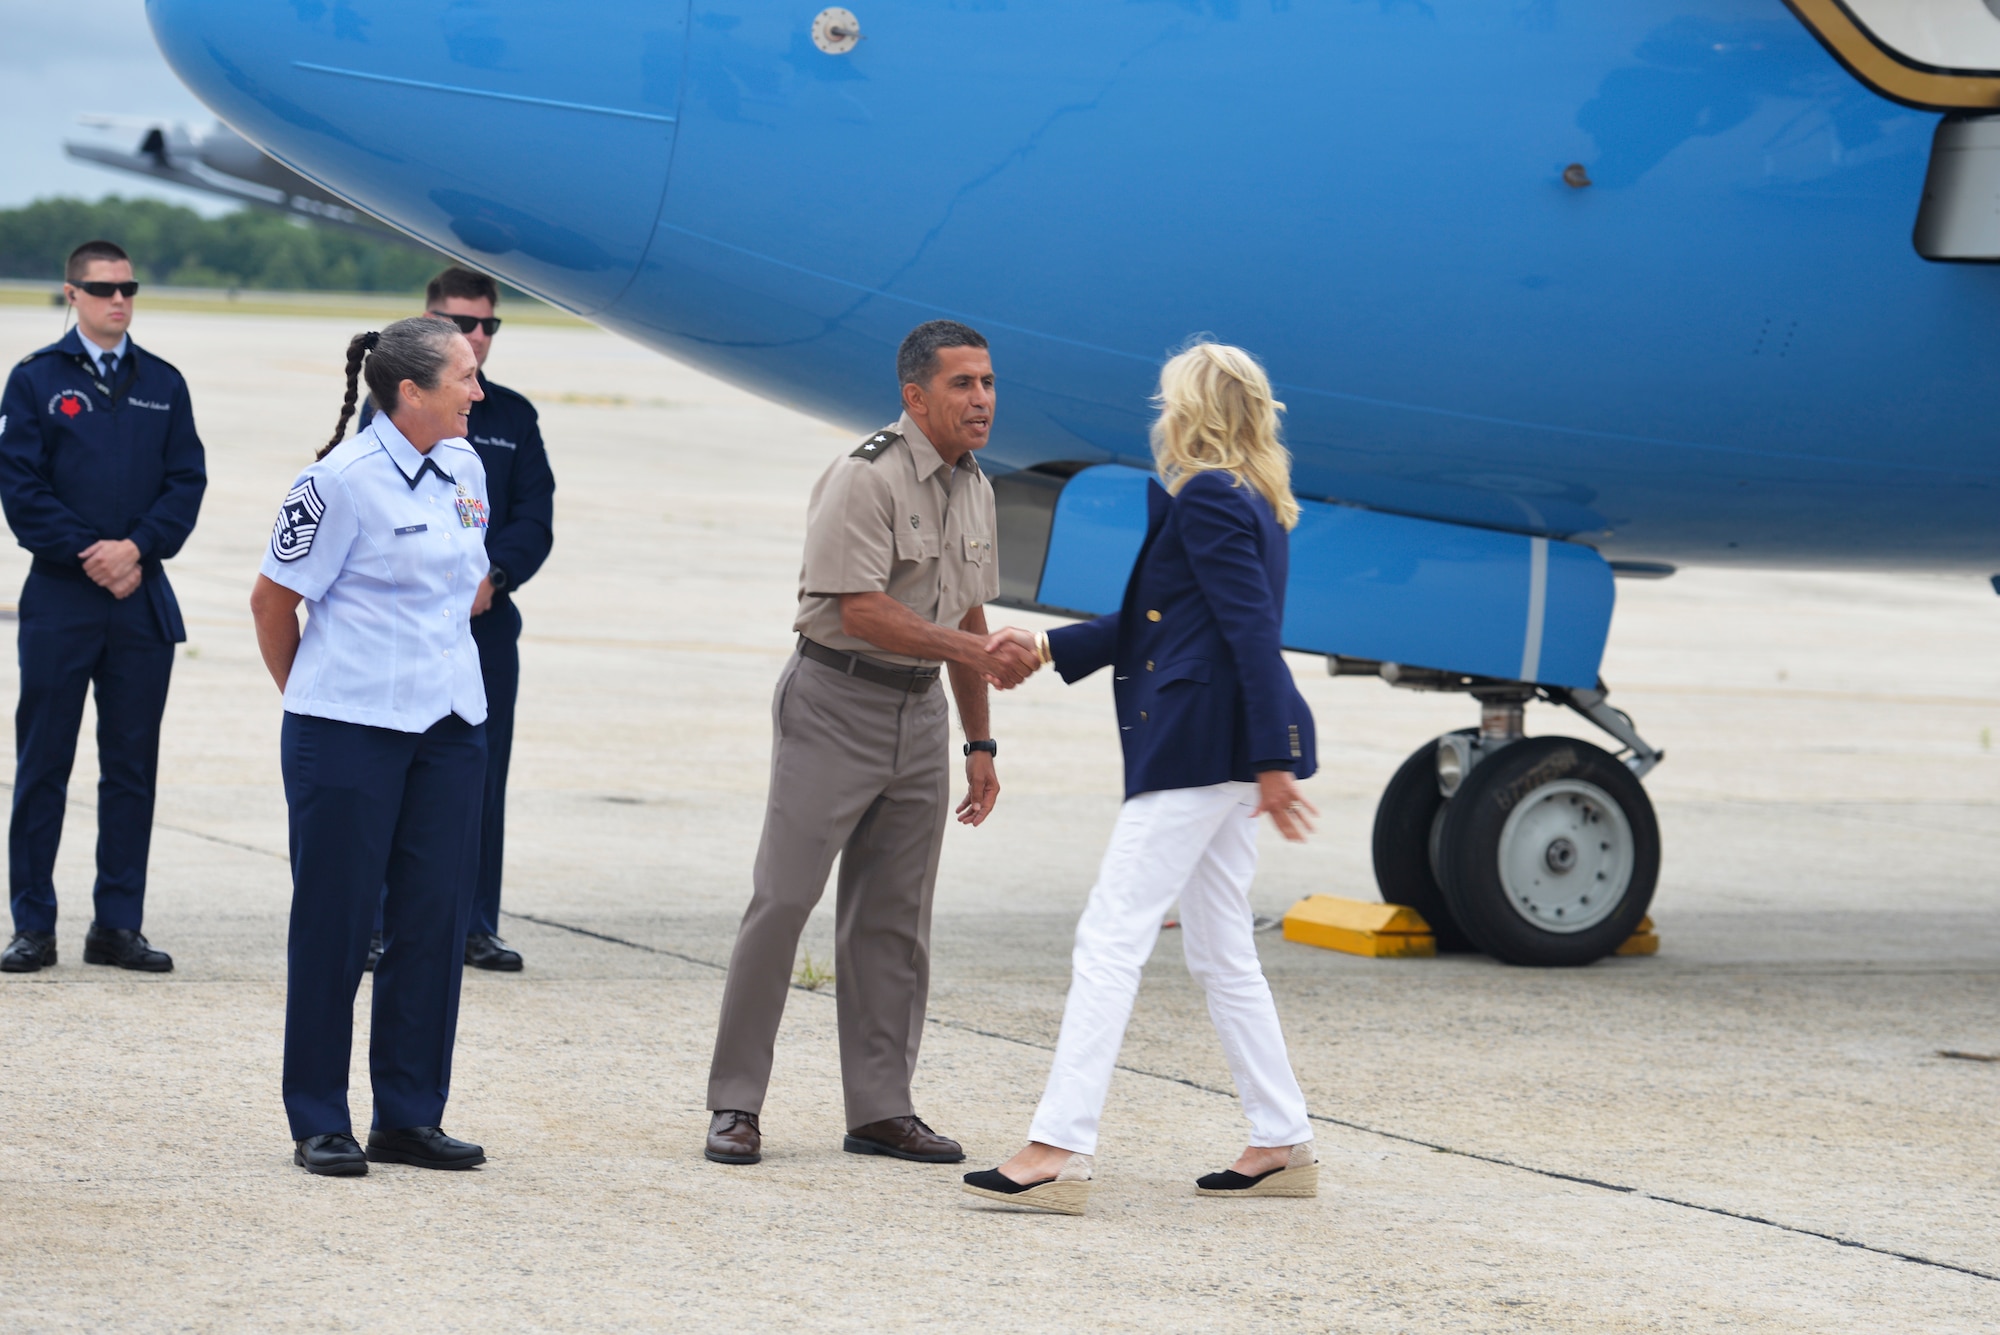 Maj. Gen. David Mikolaities, right, the Adjutant General for the New Hampshire National Guard, and Chief Master Sgt. Erica Rhea, left, 157th Air Refueling Wing command chief, greet First Lady Dr. Jill Biden as she arrives at Pease Air National Guard Base, July 3.